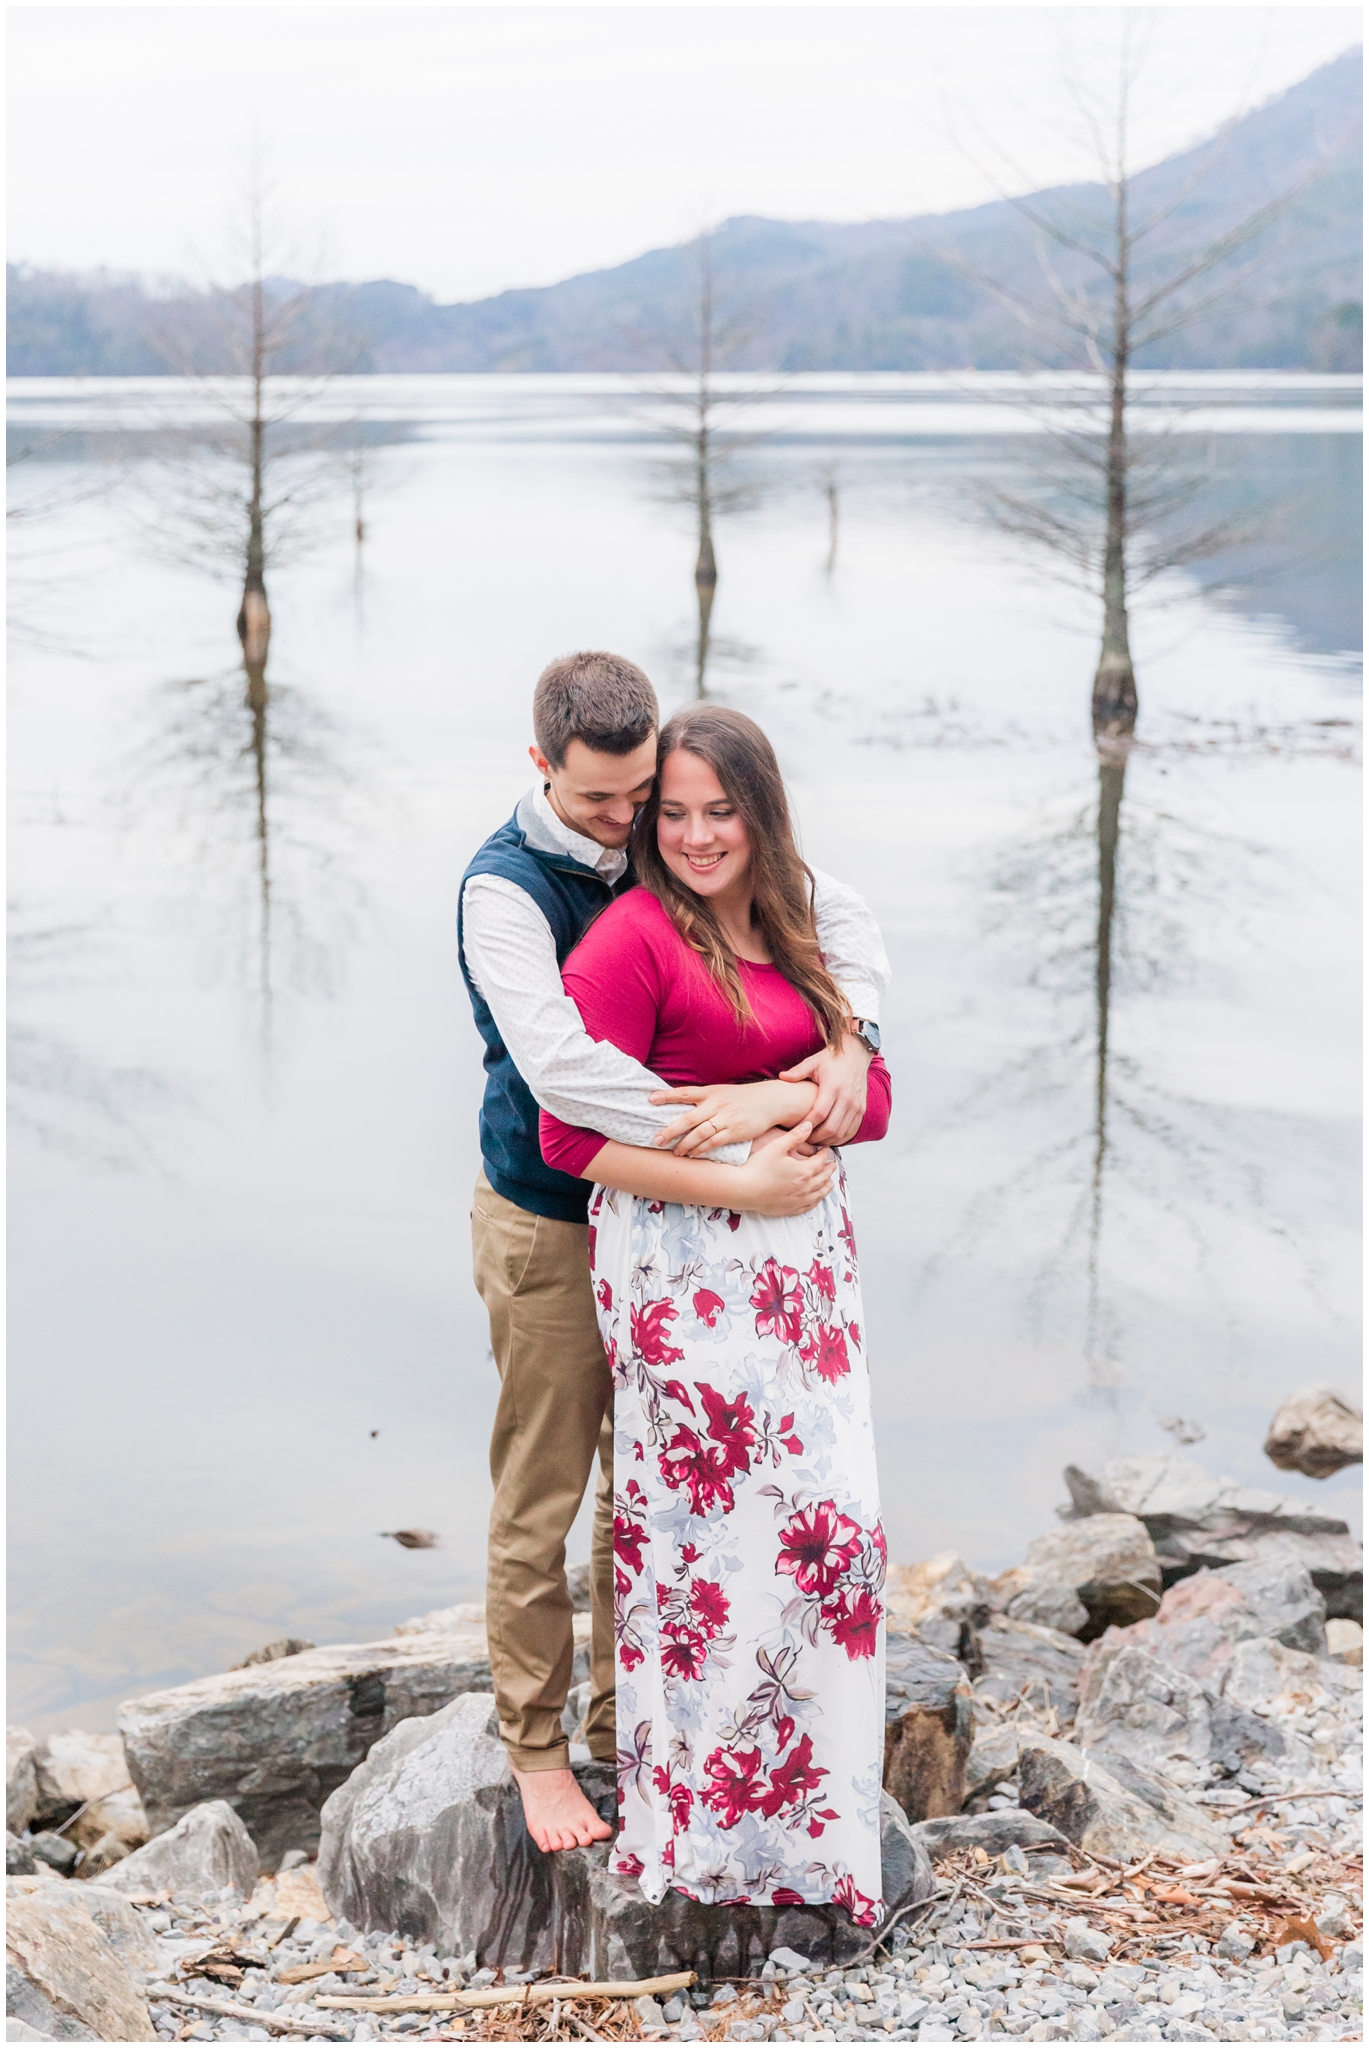 danae church and scot brunner engagement session on ocoee lake in cherokee national forest and ocoee lake